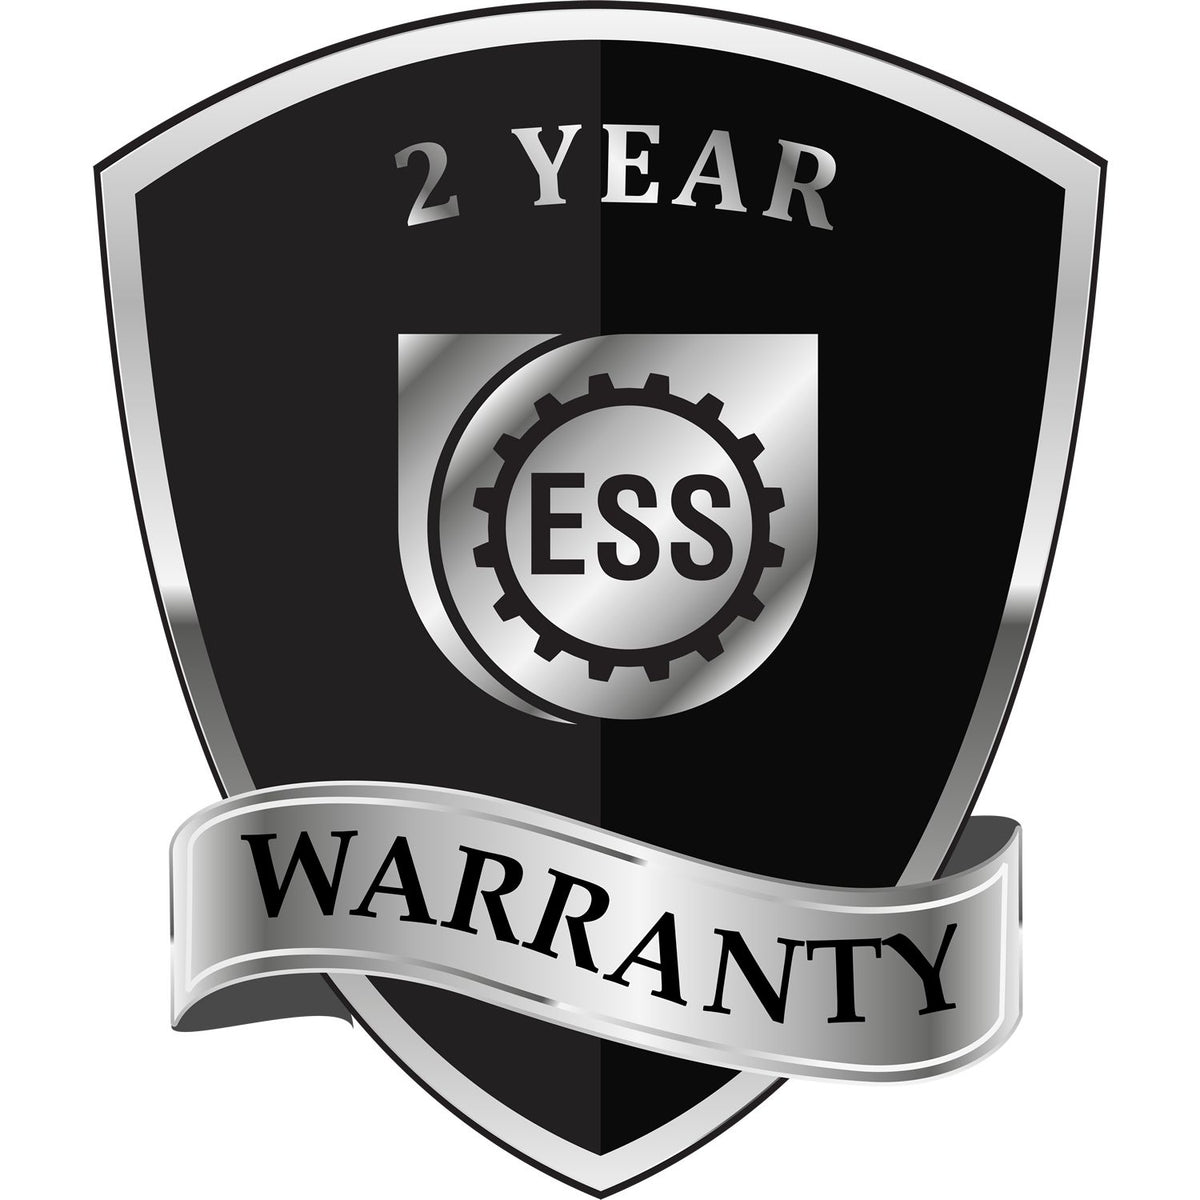 A black and silver badge or emblem showing warranty information for the Oklahoma Geologist Desk Seal